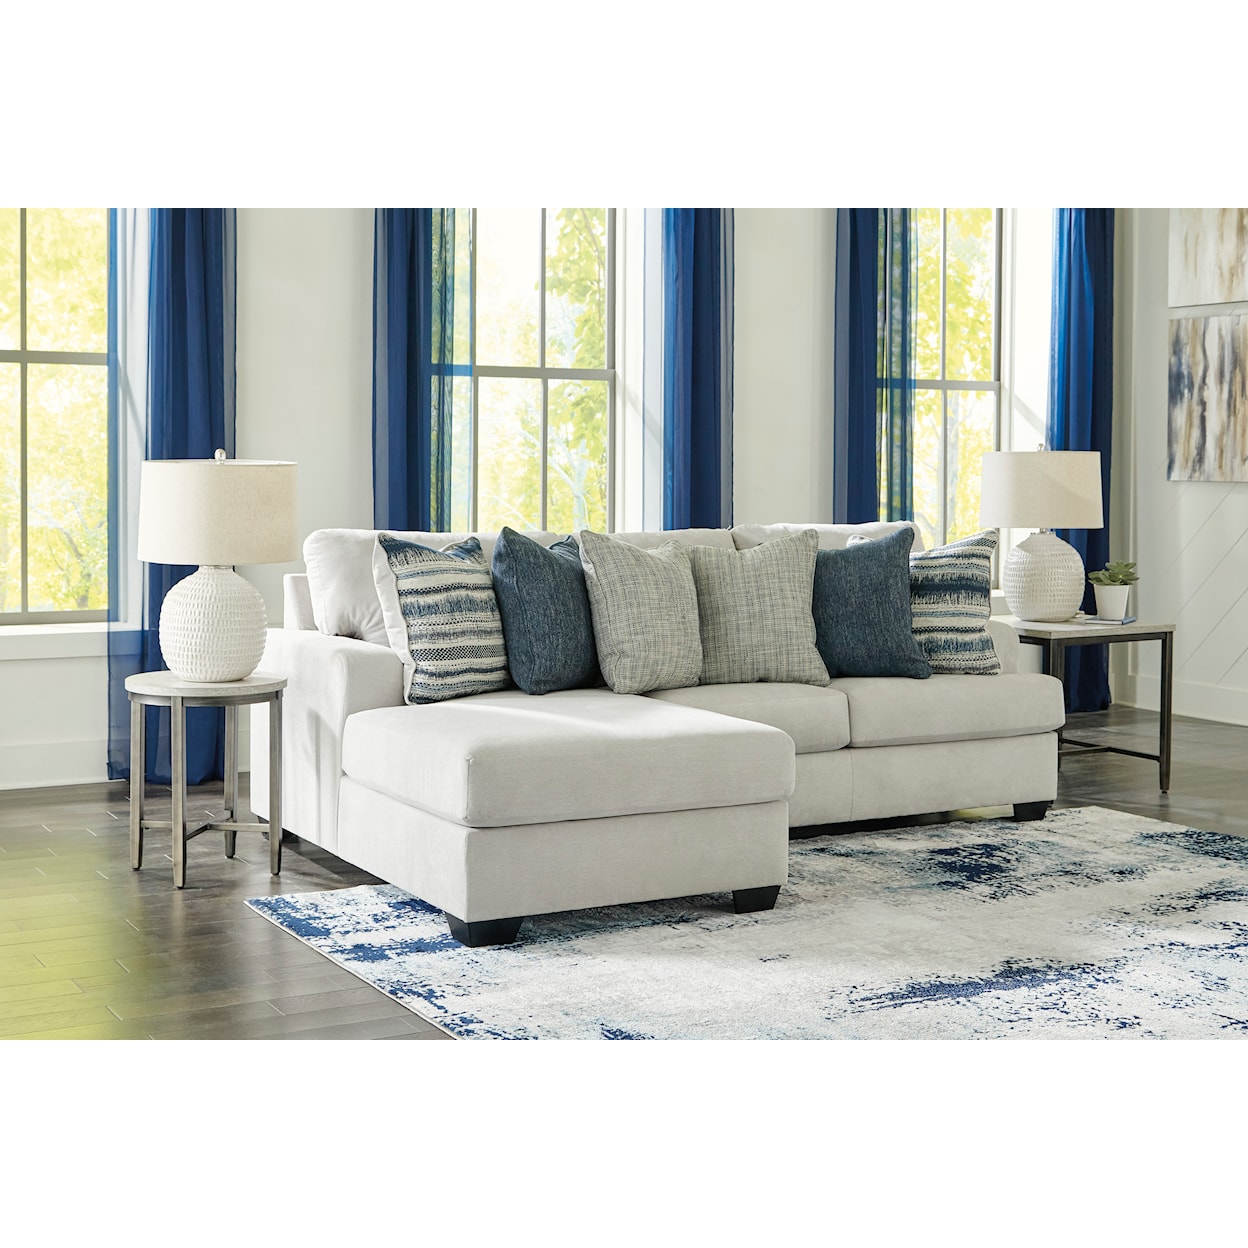 Benchcraft Lowder 2-Piece Sectional with Chaise